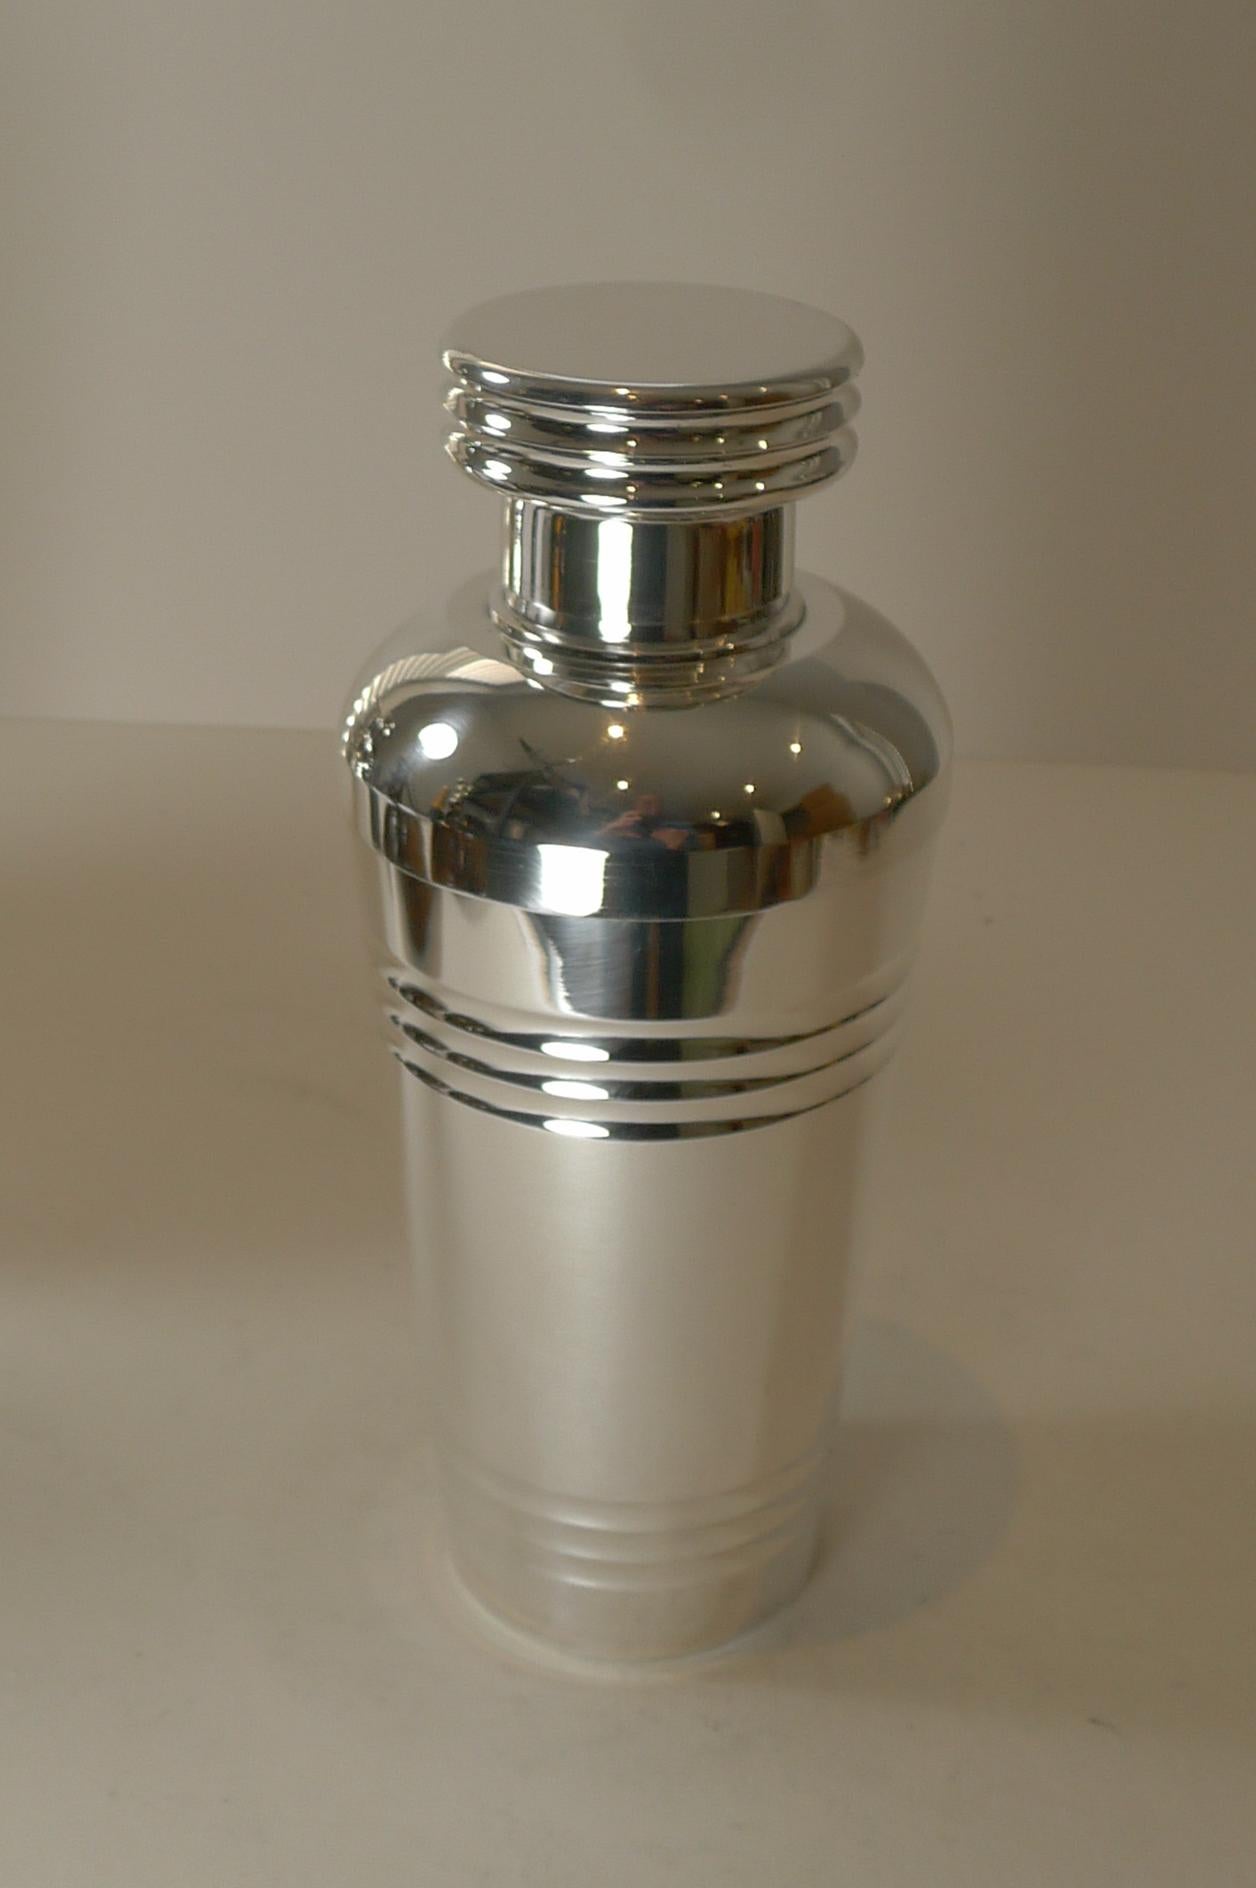 A very strong shape and design was adopted to create this large Art Deco Cocktail shaker dating to c.1925.

Our silversmith has professionally cleaned and polished it to create a piece in excellent condition. The pull off top retains it's original